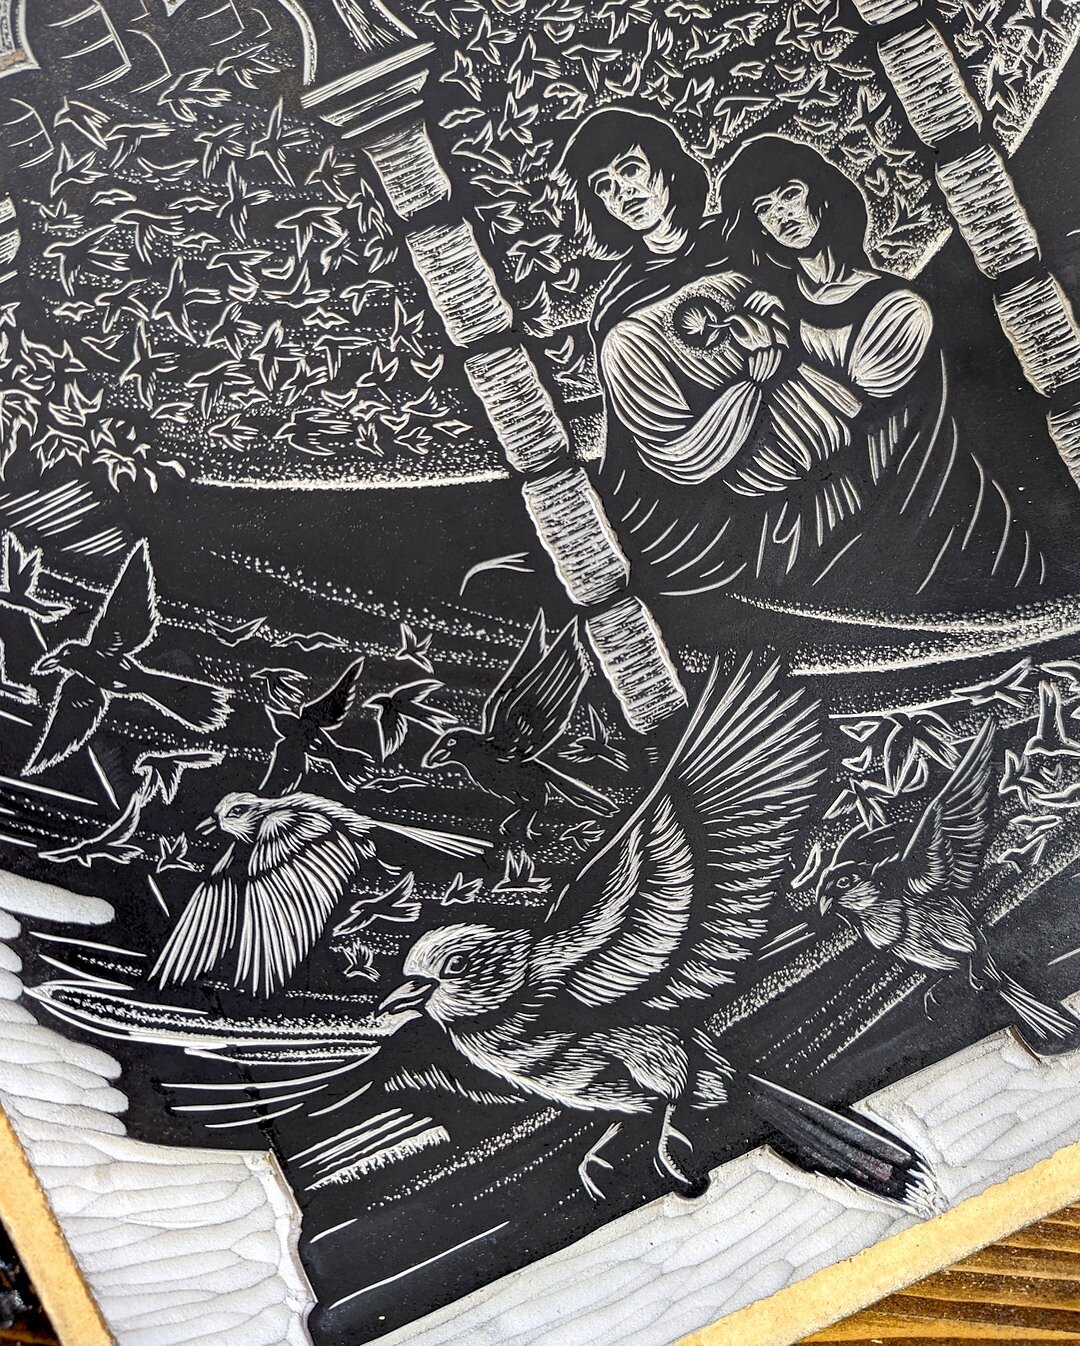 Starting to get a little bit crazy from staring too much at this one! Might need to park it for a wee bit while I work on something else 🥴

#fairytaleillustrator #fairytaleart #brothersgrimm  #brothersgrimmfairytales #linocutprocess